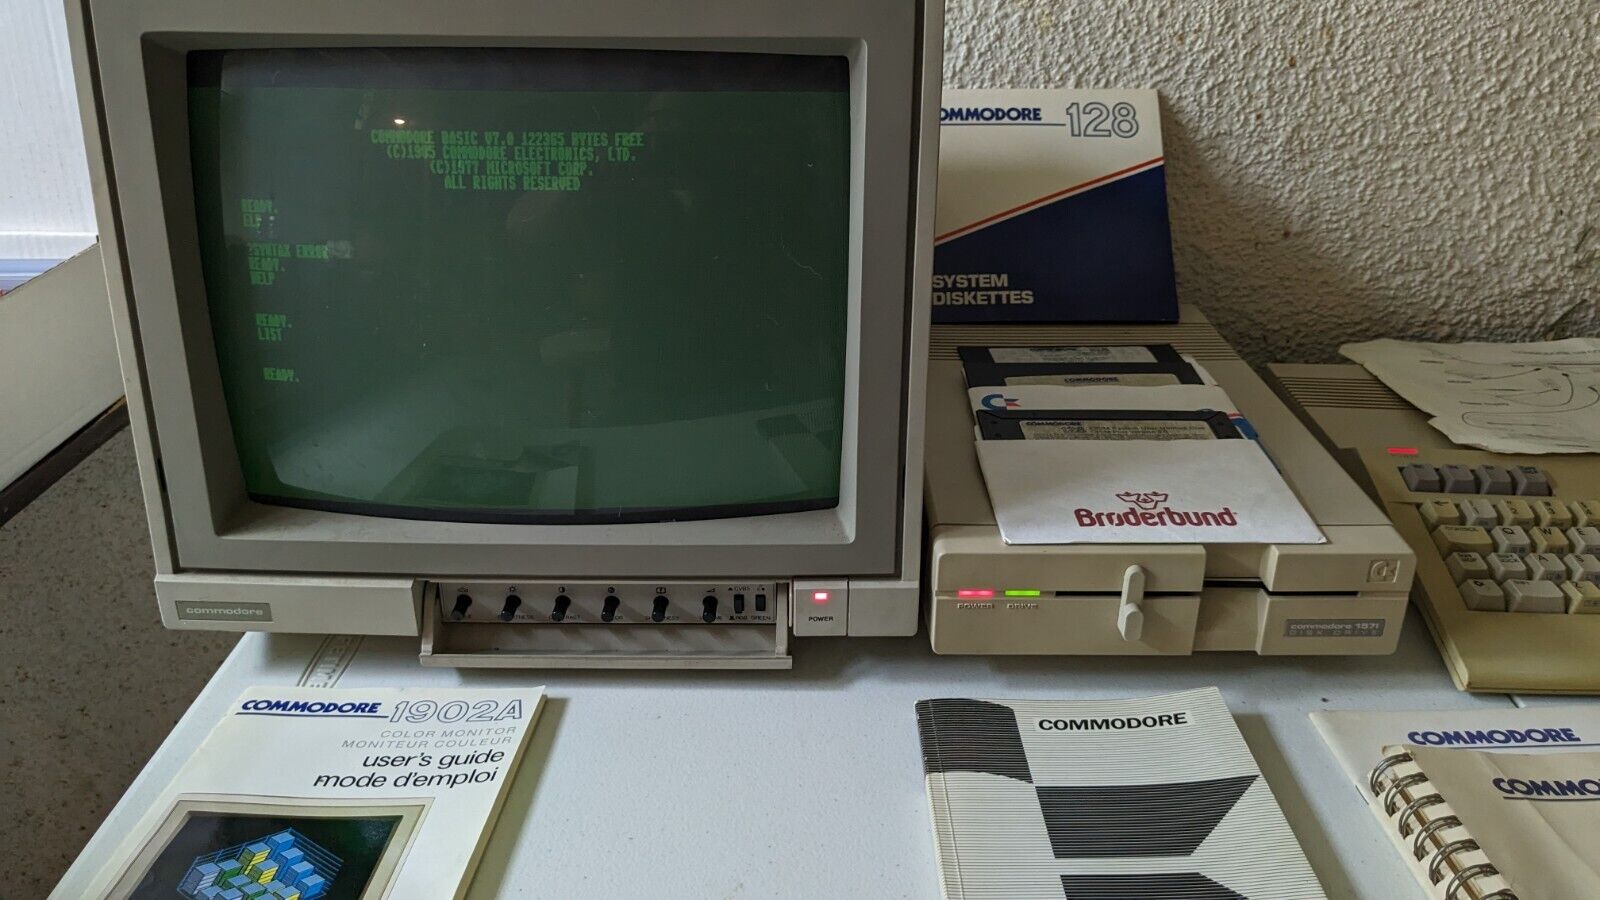 Complete working vintage commodore 128 computer system with original software 